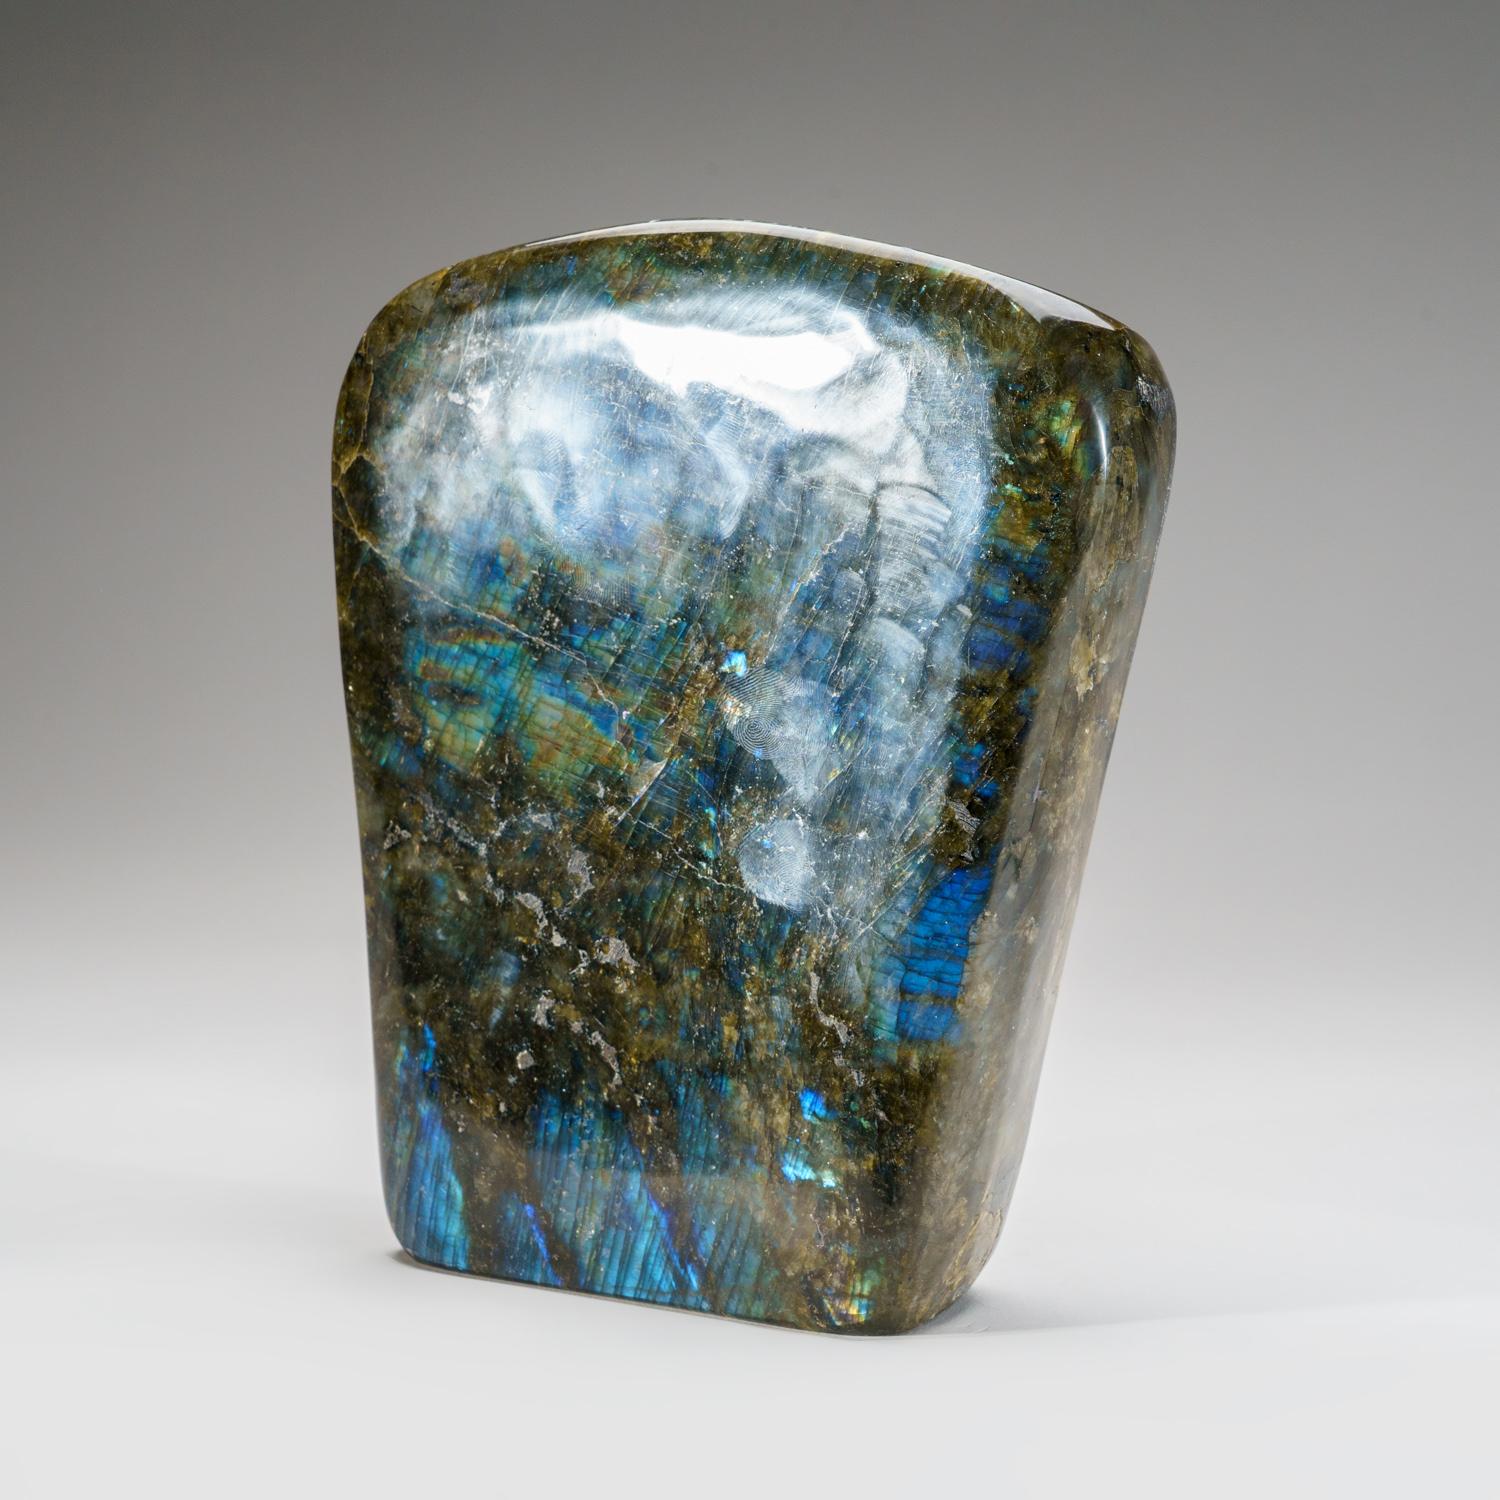 Top quality, hand polished Labradorite freeform with beautiful iridescent play of colors of blue, yellow and red which is caused by internal fractures in the mineral that reflect light back and forth, dispersing it into different colors.

Highly